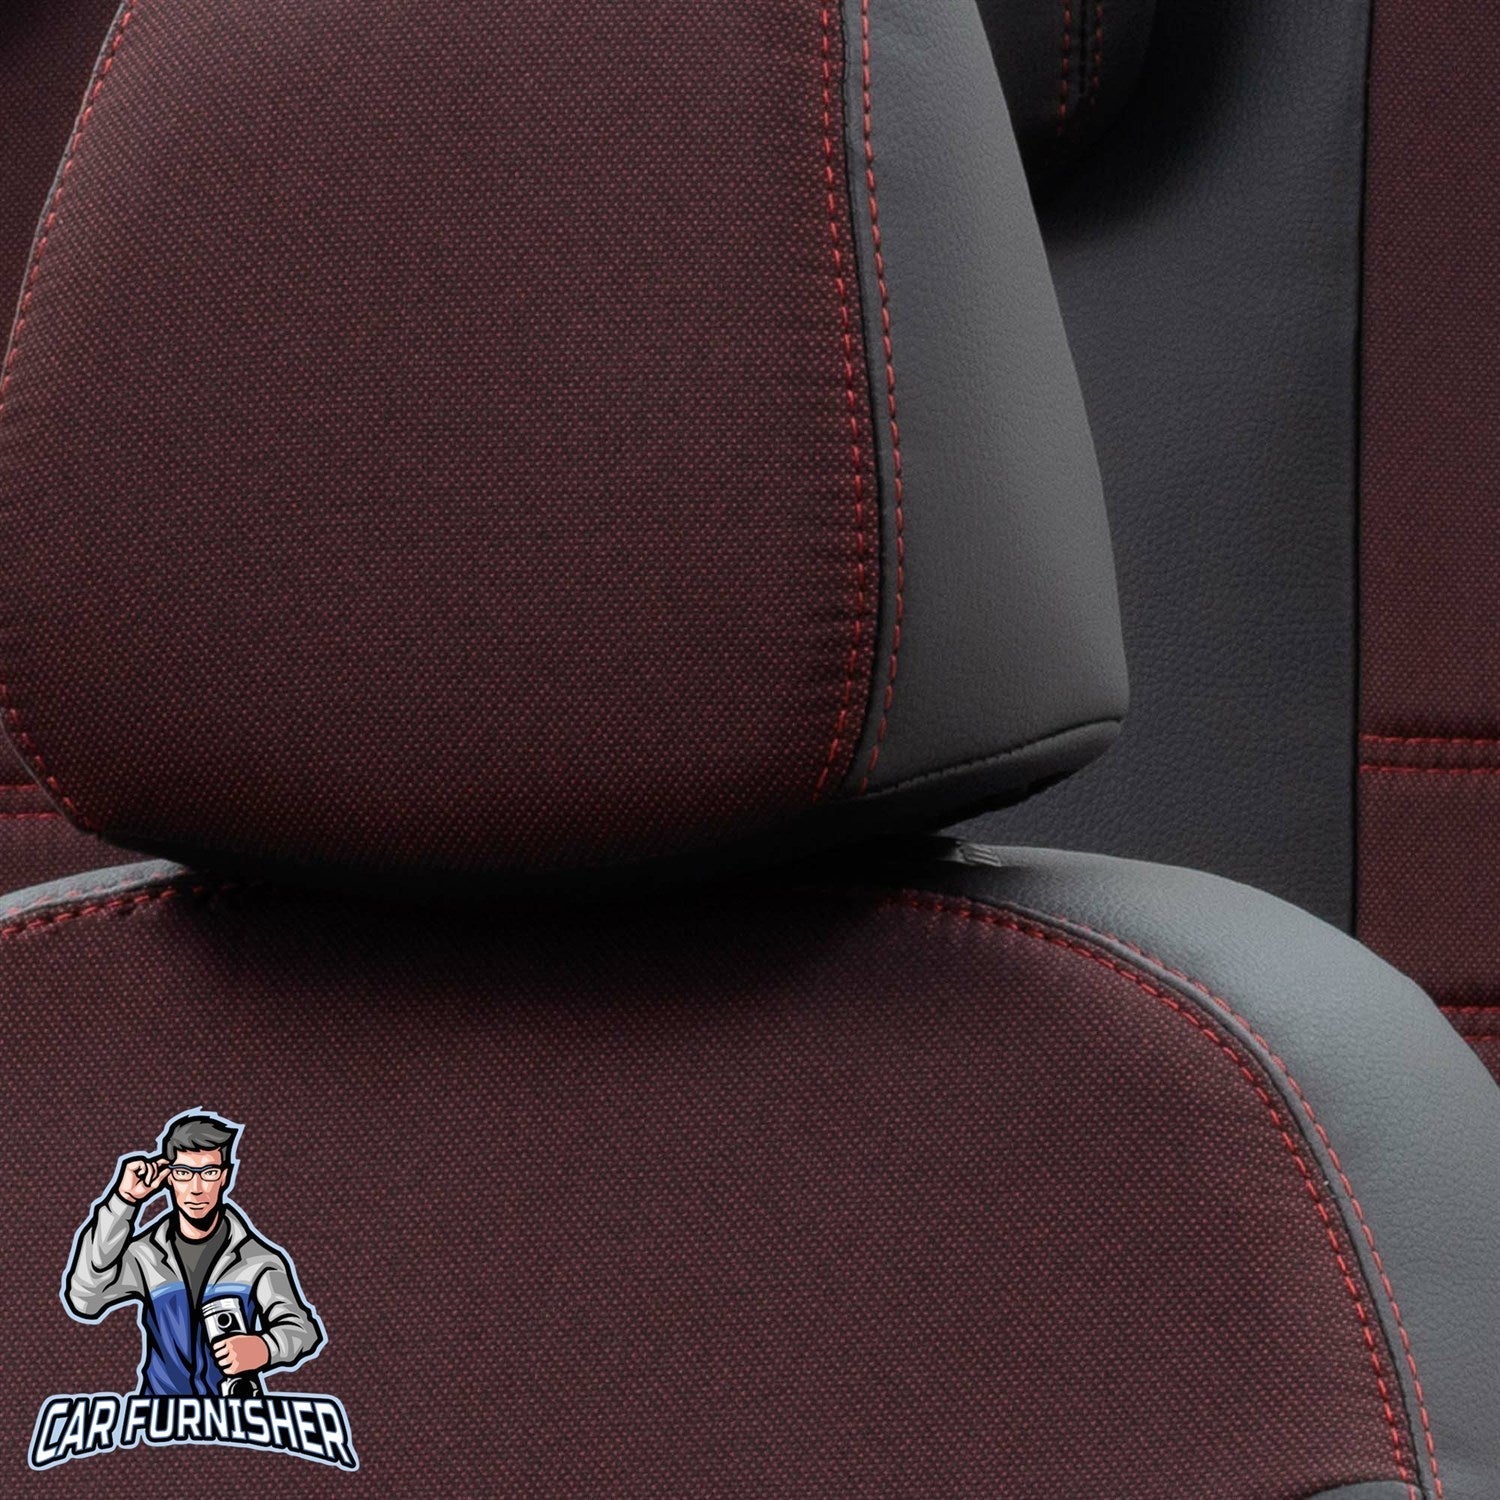 Volkswagen Caravelle Seat Cover Paris Leather & Jacquard Design Red Leather & Jacquard Fabric